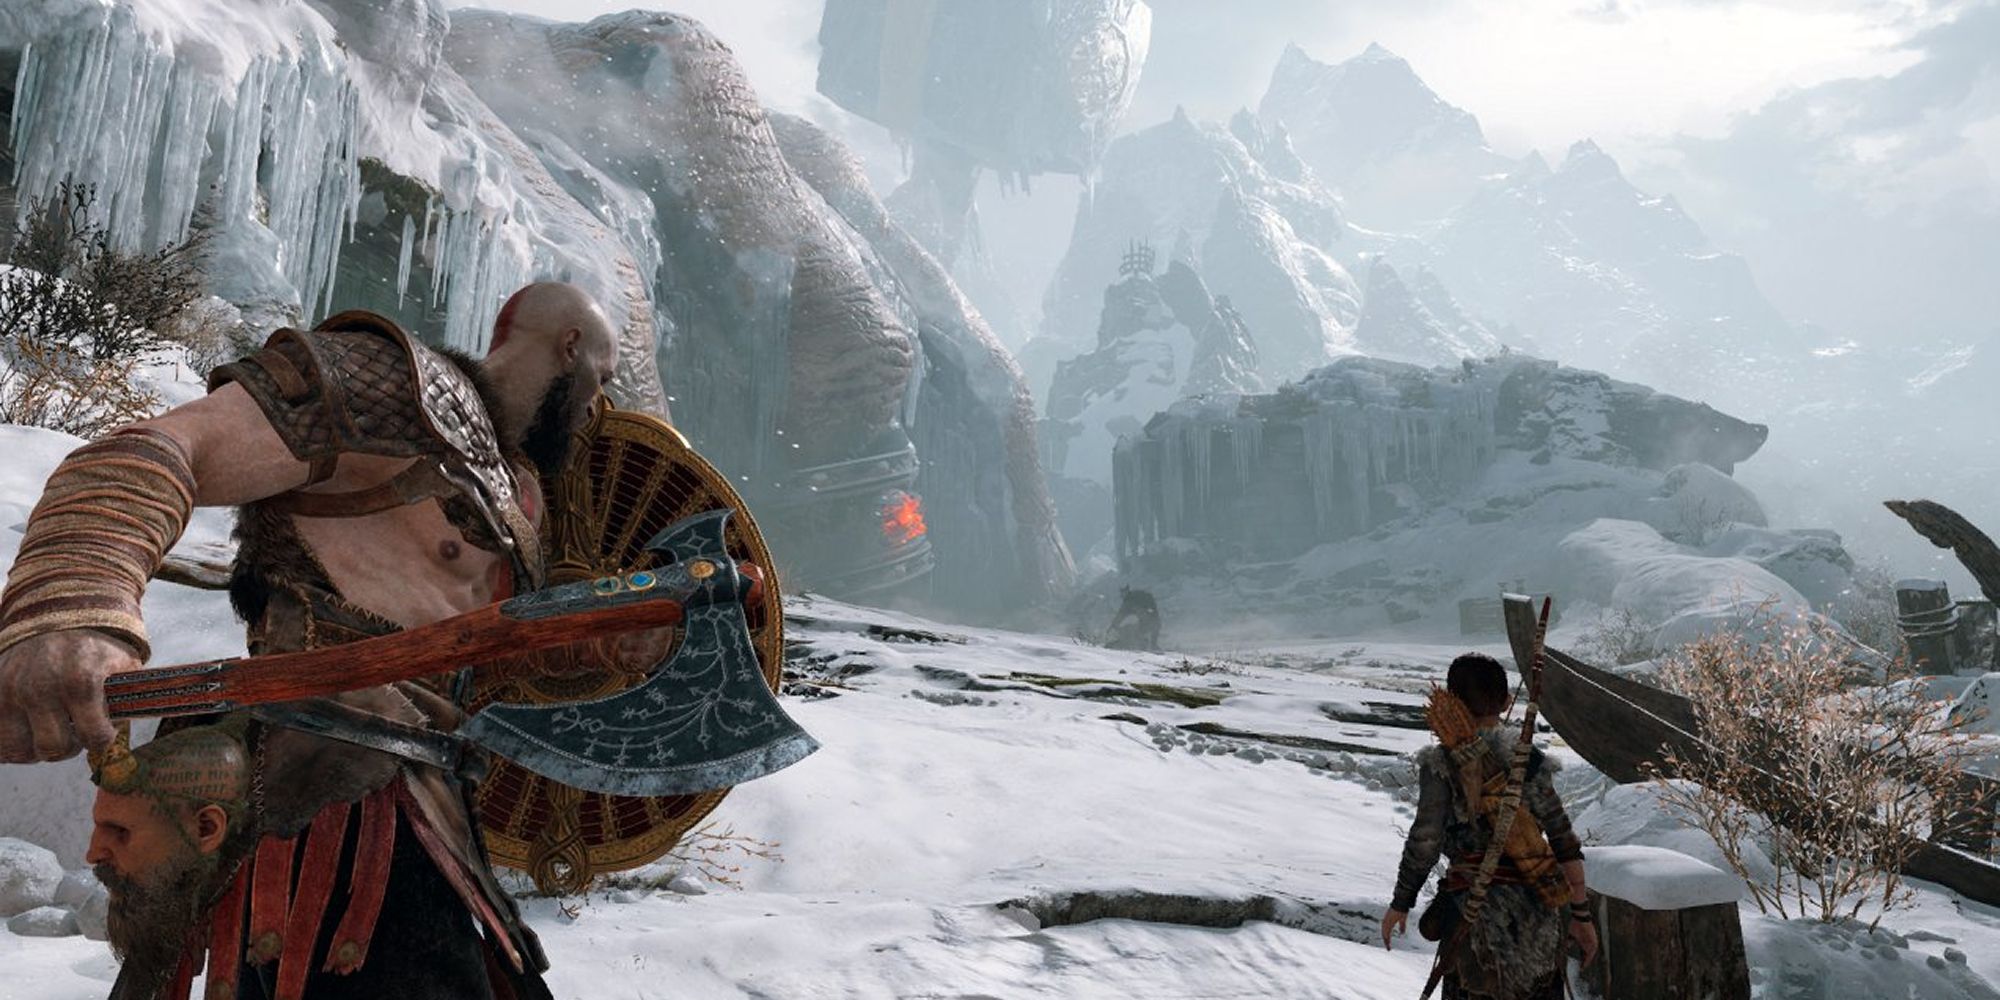 Kratos Prepares To Fight In The Snow